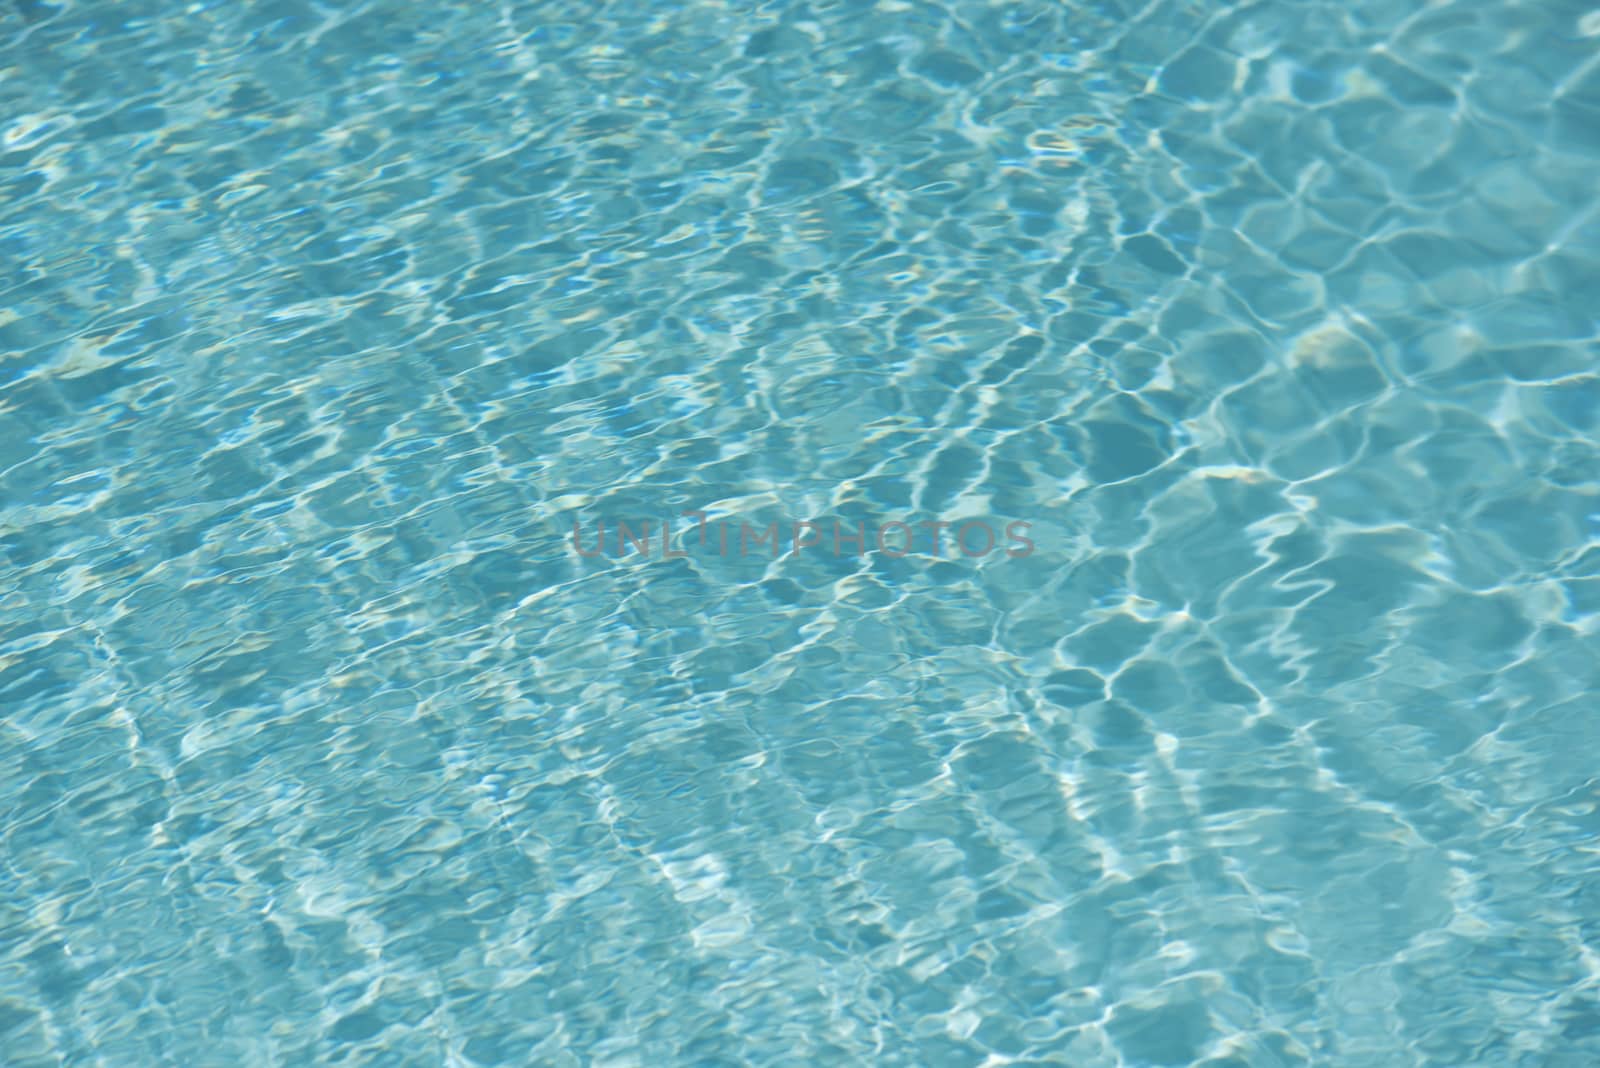 Reflection over water in a swimming pool